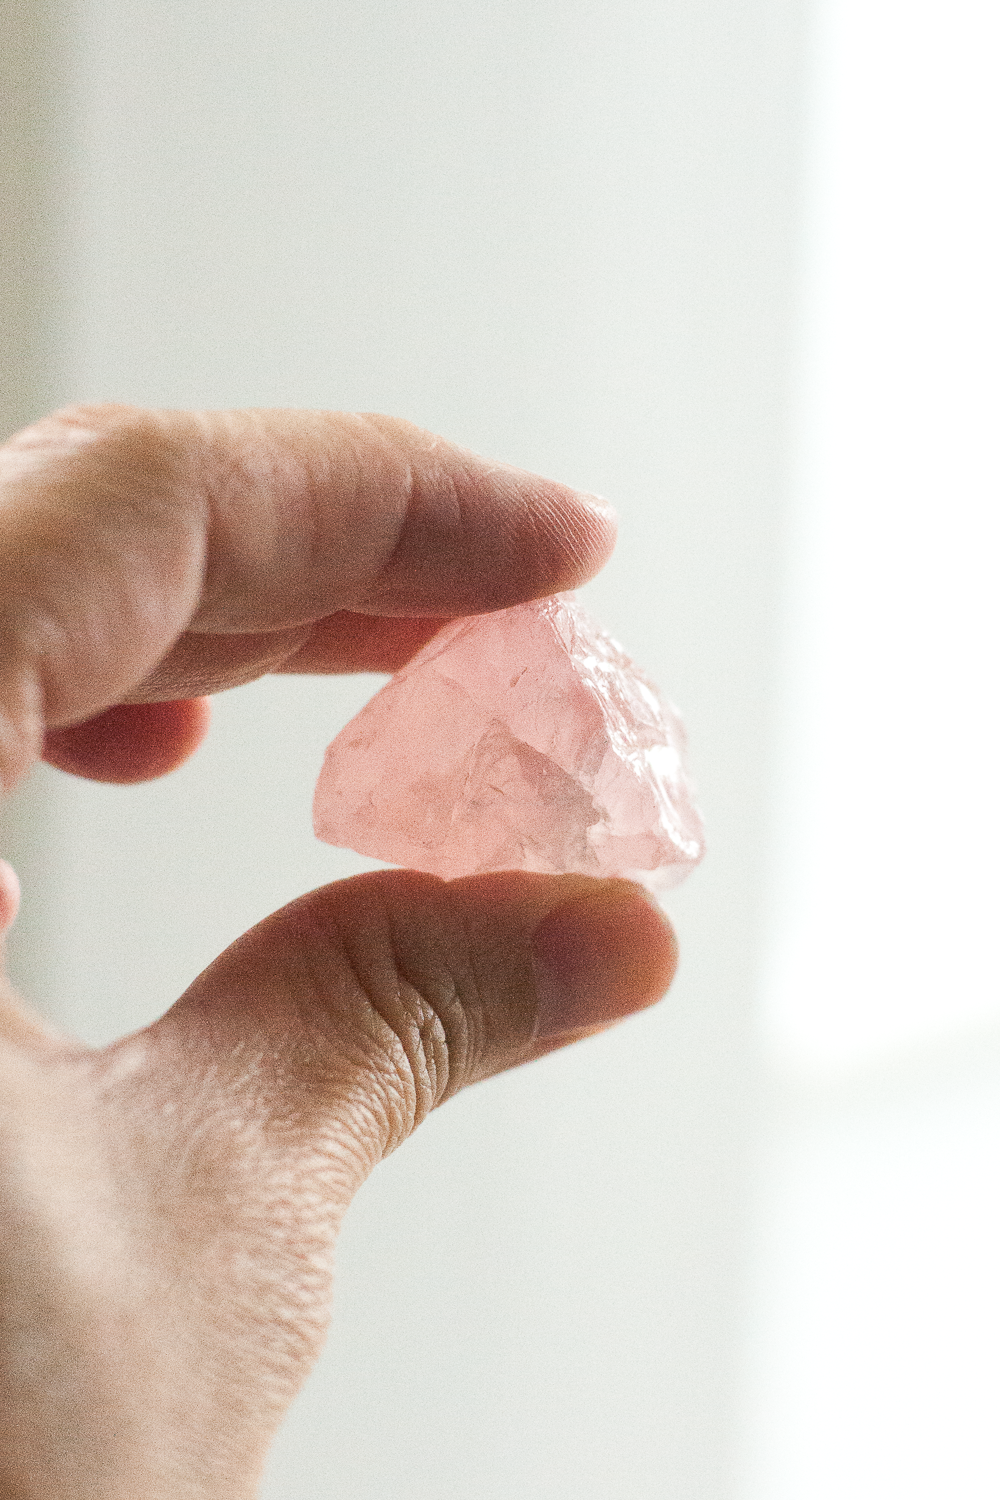 Rose Quartz Stone, Energy, Unconditional Love - Gather Goods Co - Raleigh, NC